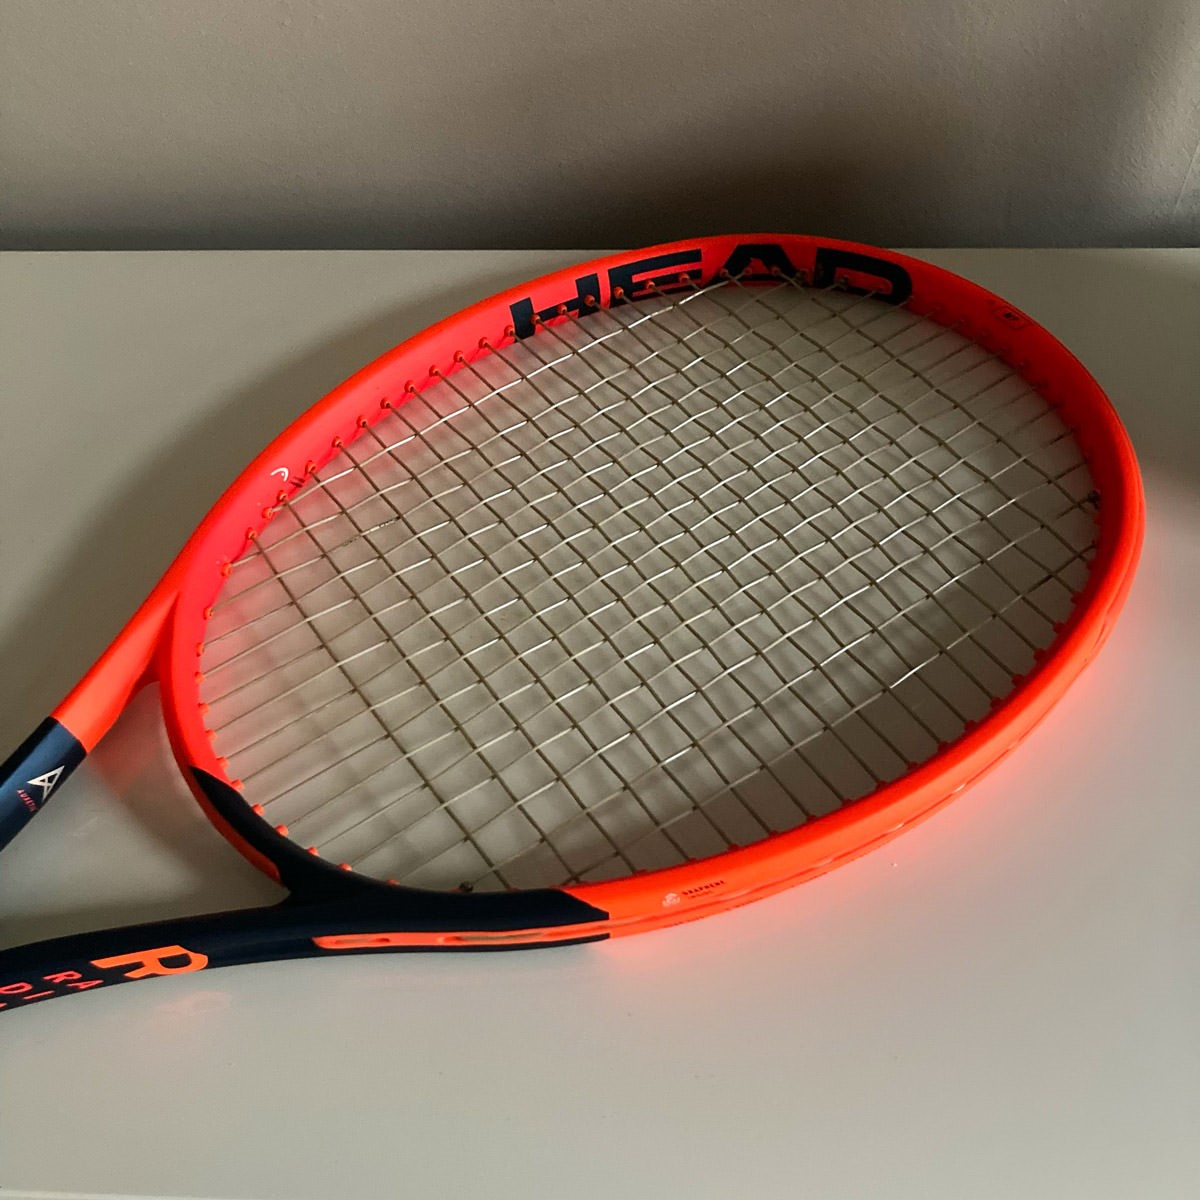 Superfried – Walk the Talk. Buying a tennis racket – Head Radical MP - strings. Considering purchases to reducing my environmental impact. 